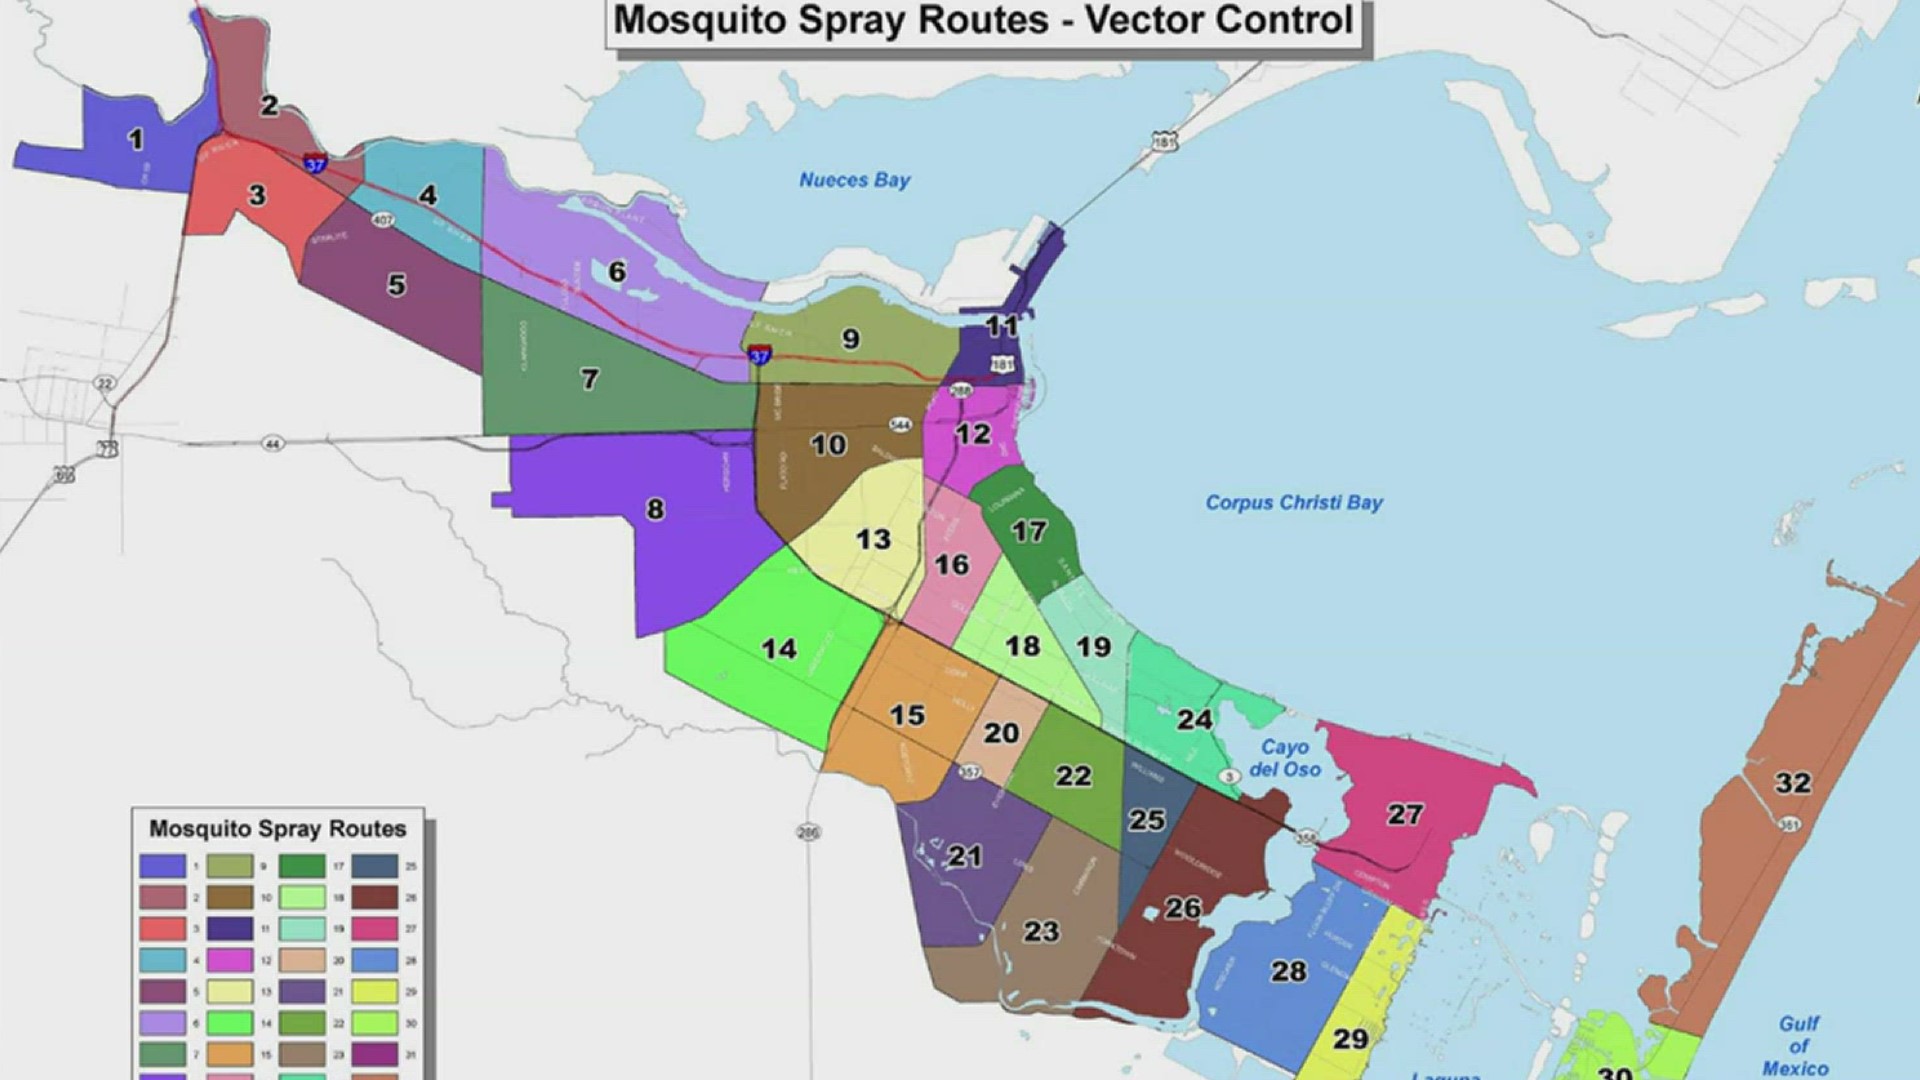 With rain chances back on the rise this week, the city's vector control is preparing for an increase in the mosquito population.